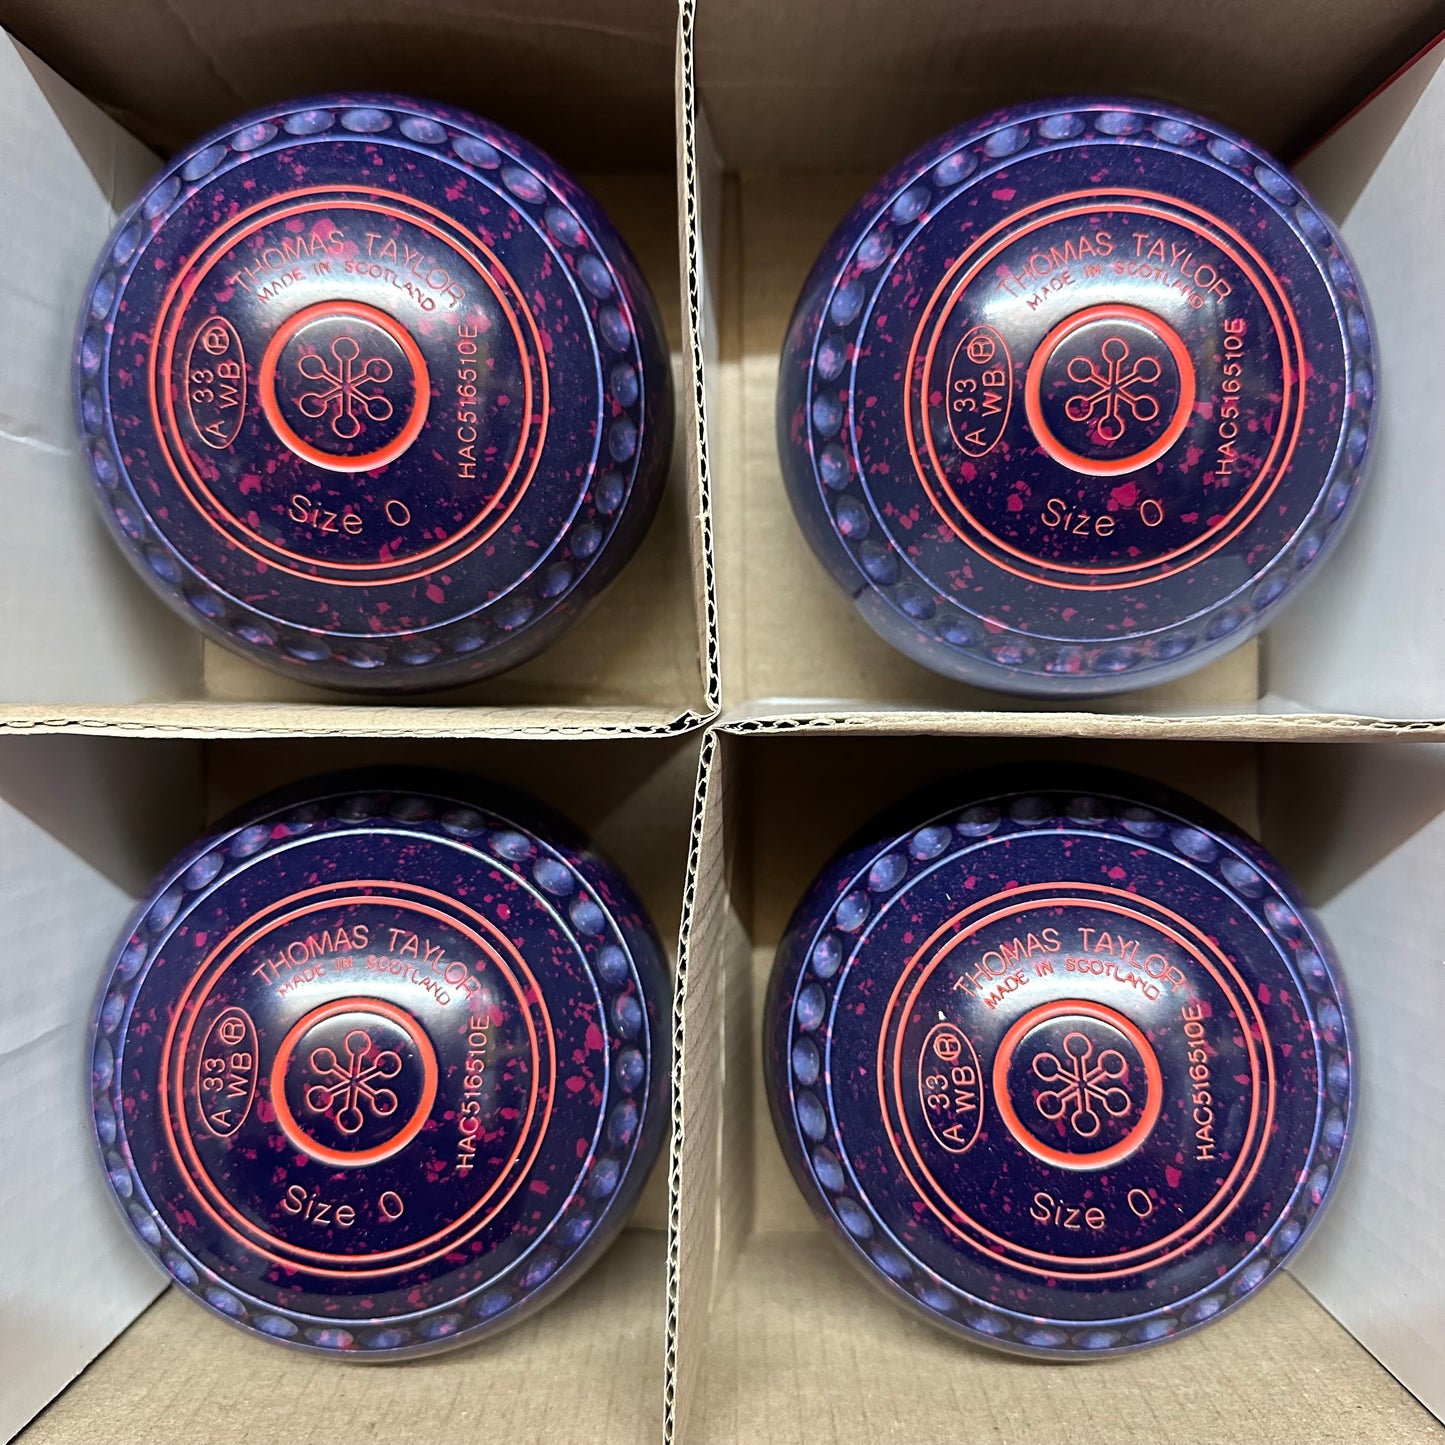 Taylor Ace - Size 0 - Dark Blue/Magenta (Red Rings) - WB33 Stamp